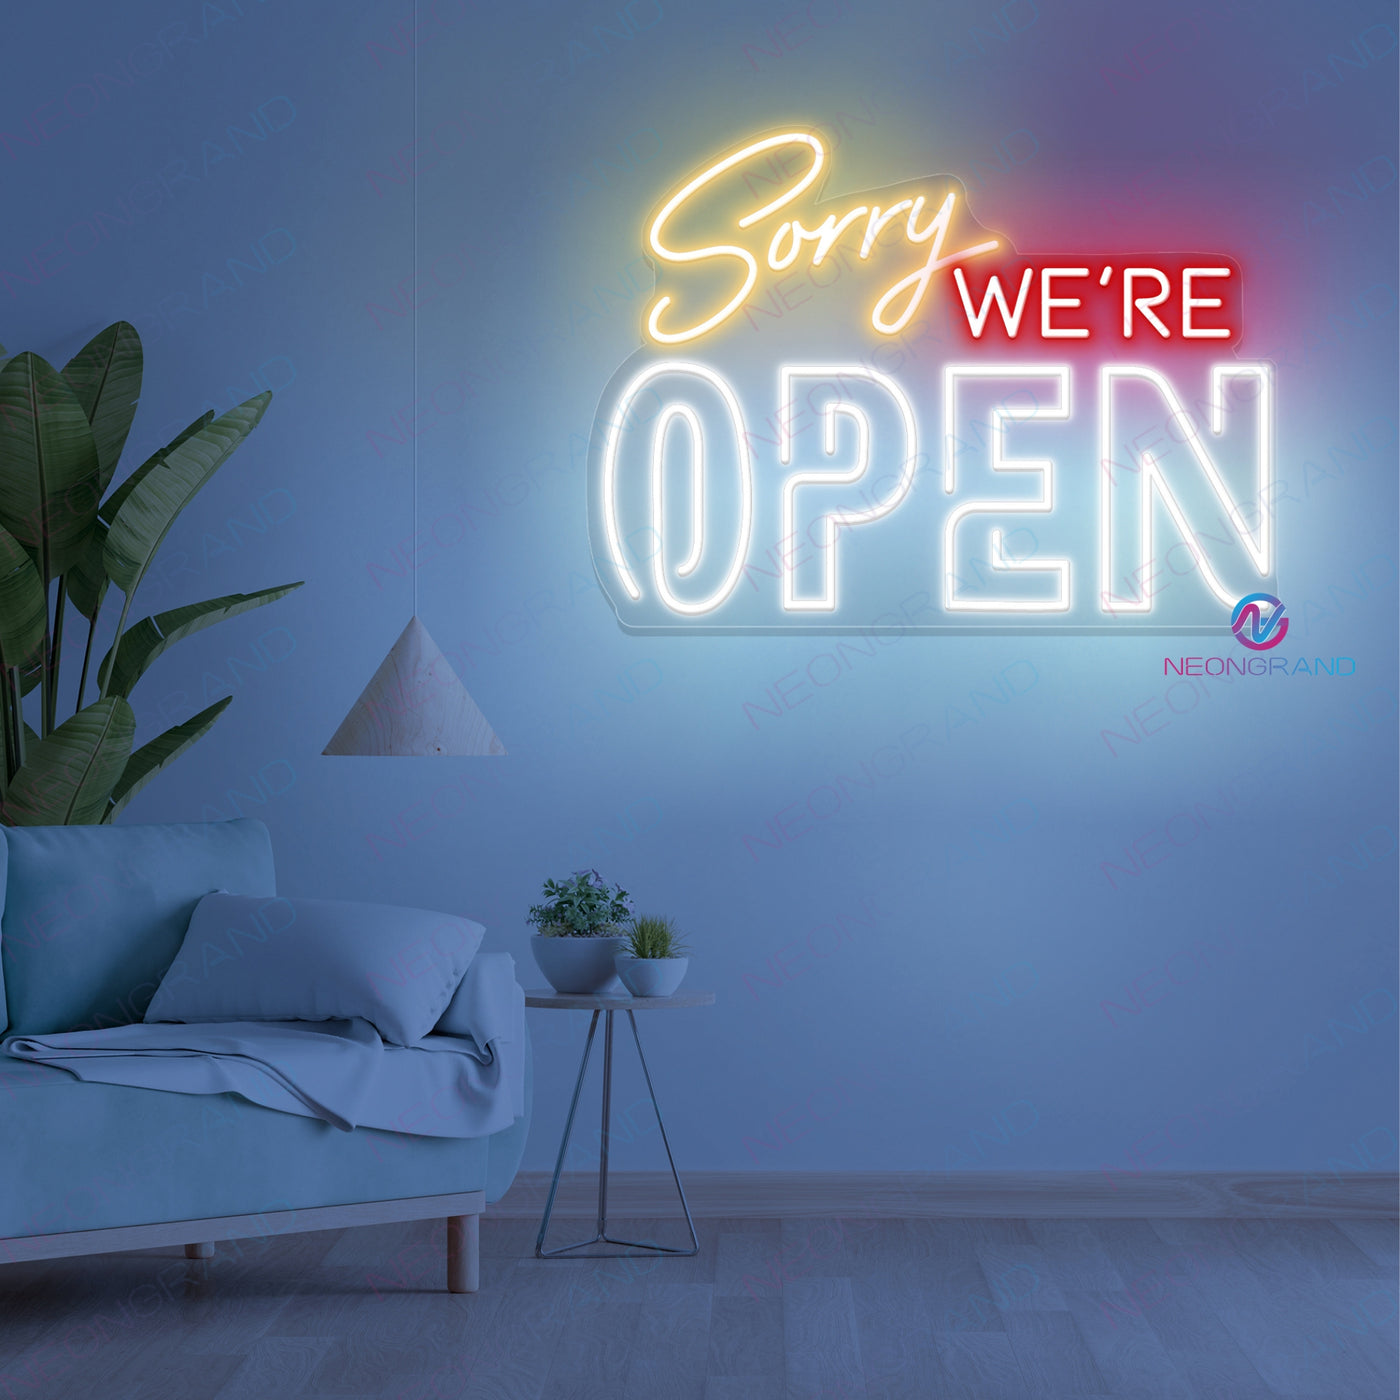 Sorry We're Open Neon Sign Business Led Light